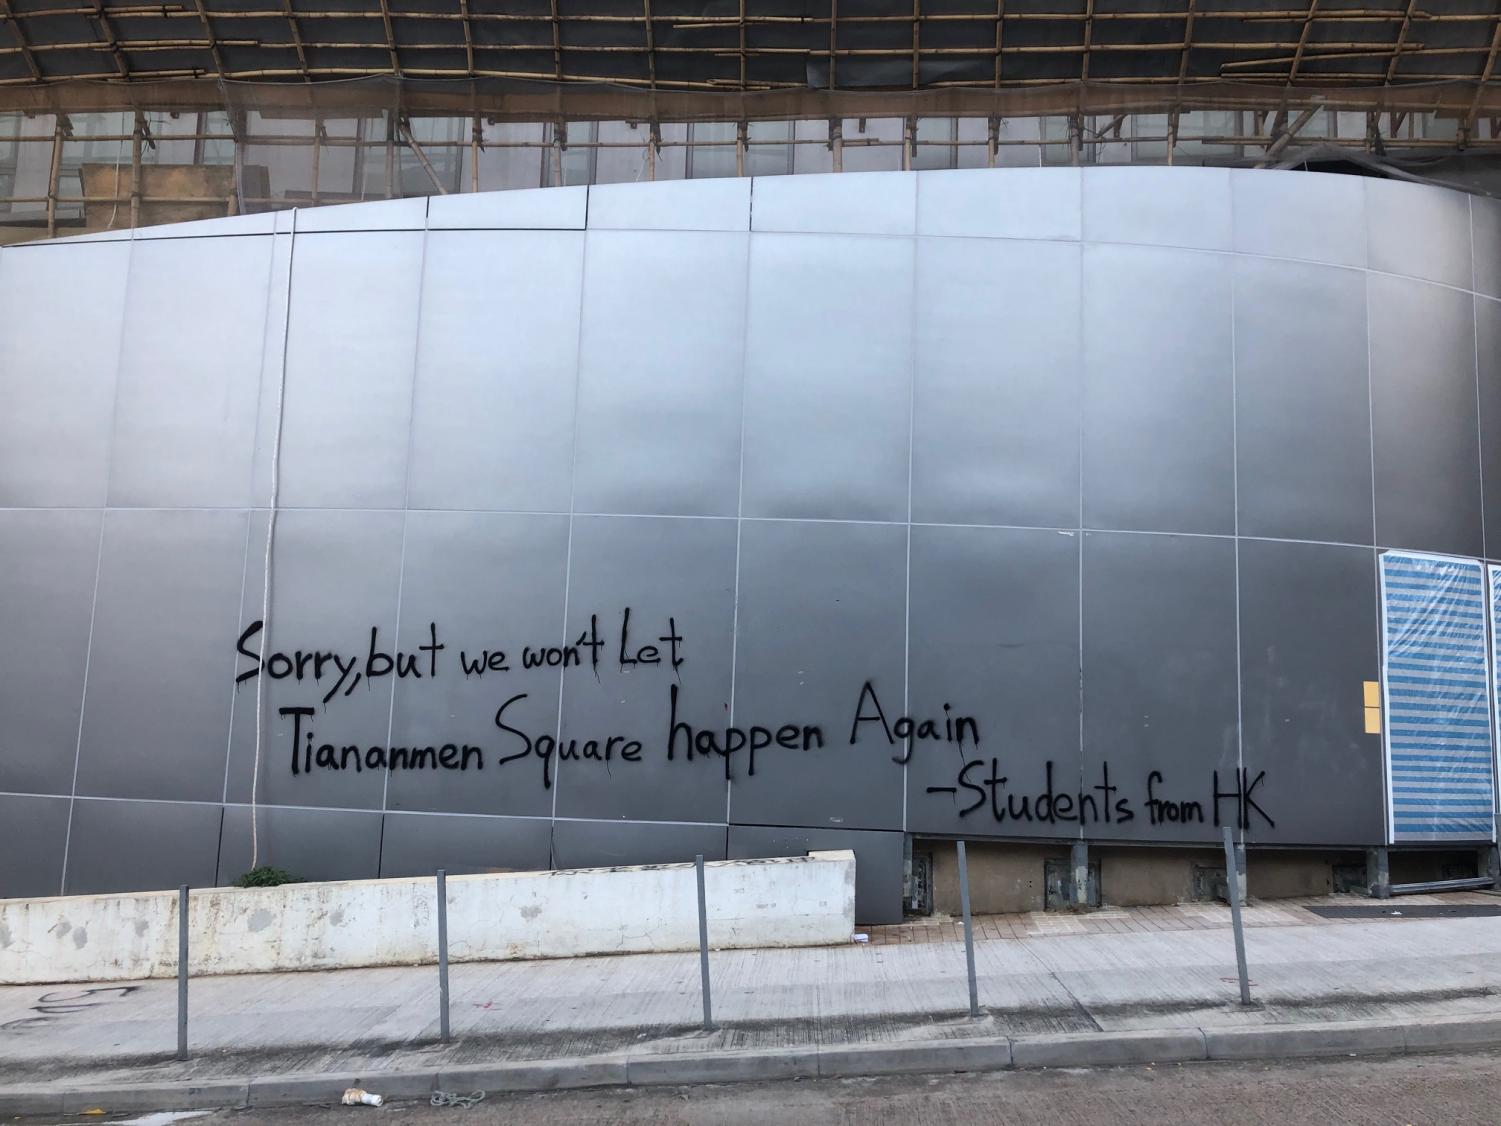 graffiti on a building reading "Sorry, but we won't let Tiananmen Square happen again -students from HK"